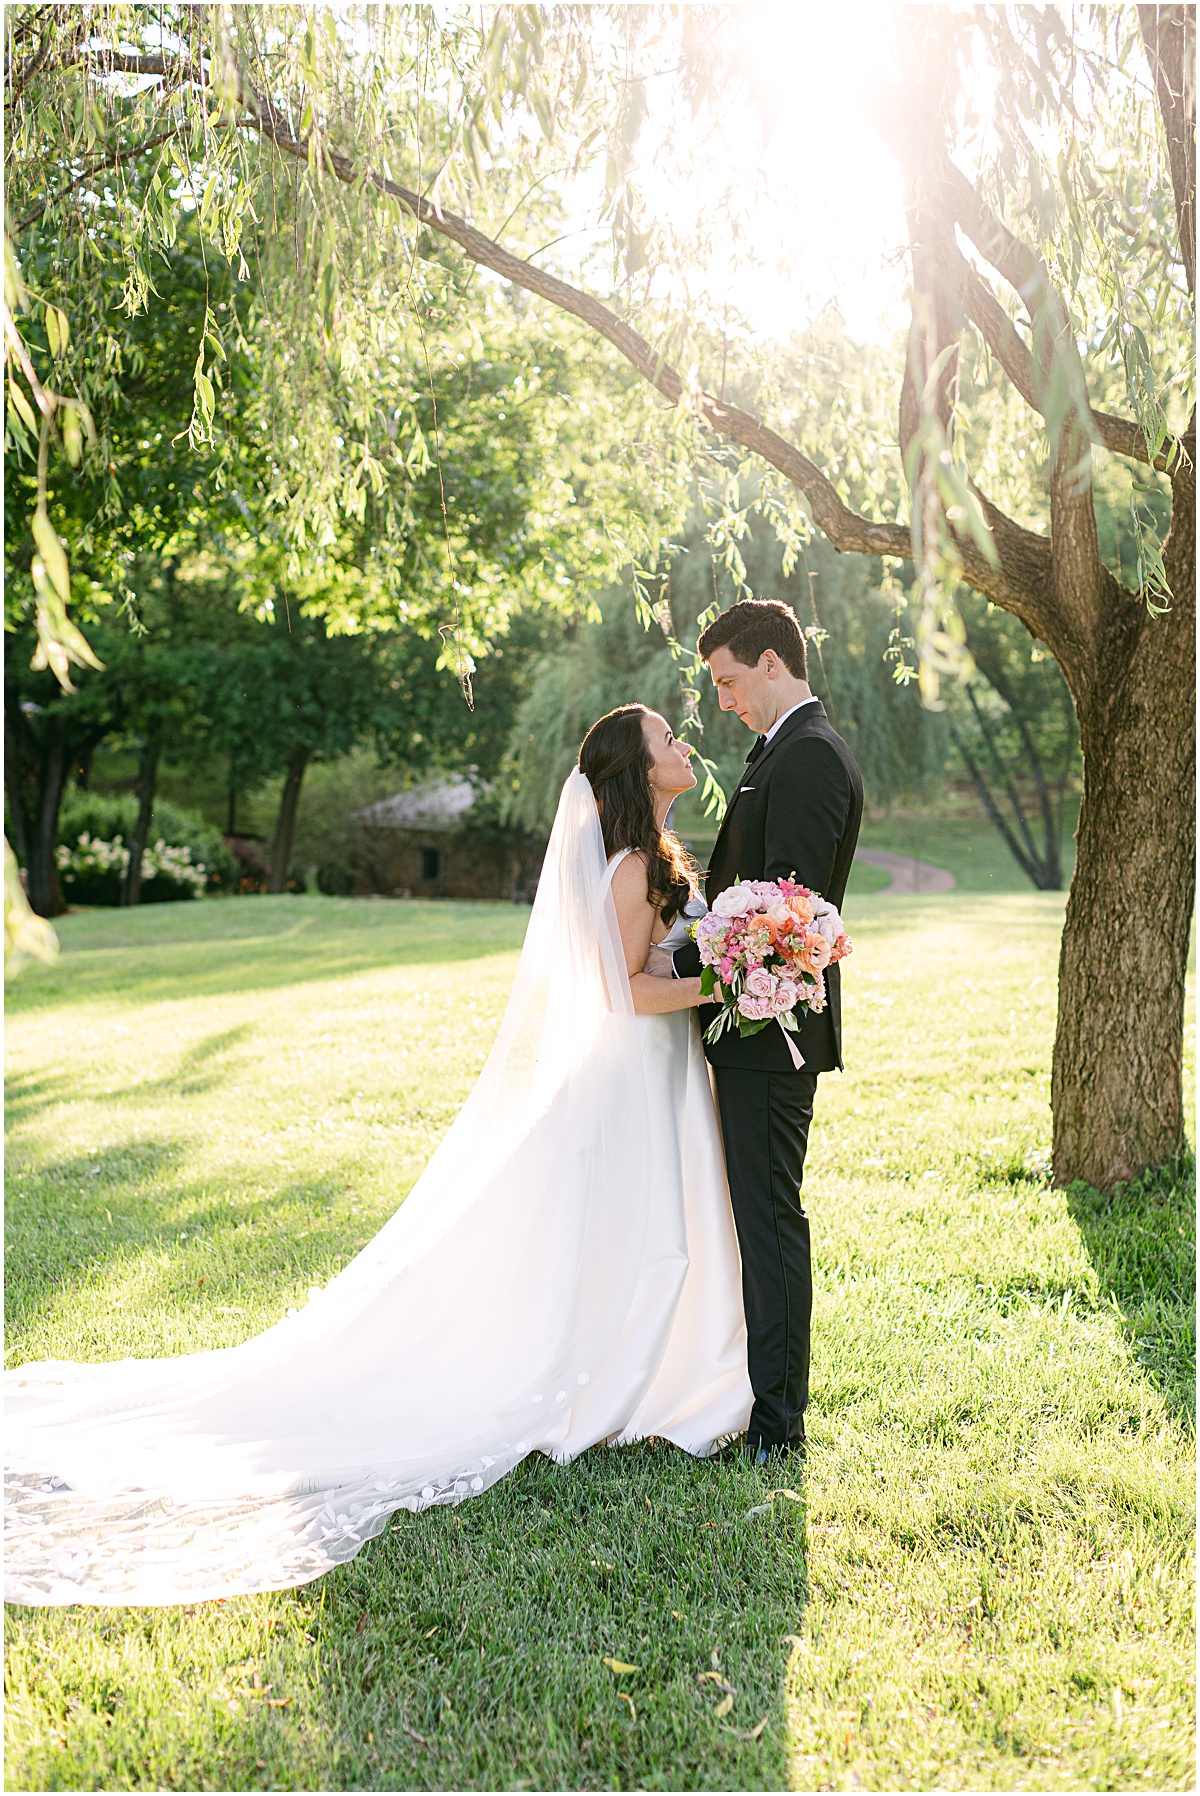 Portraits with the willow tree. Joyful summer wedding at the Inn at Willow Grove by Sarah Bradshaw. Planning by Kelley Cannon Events.